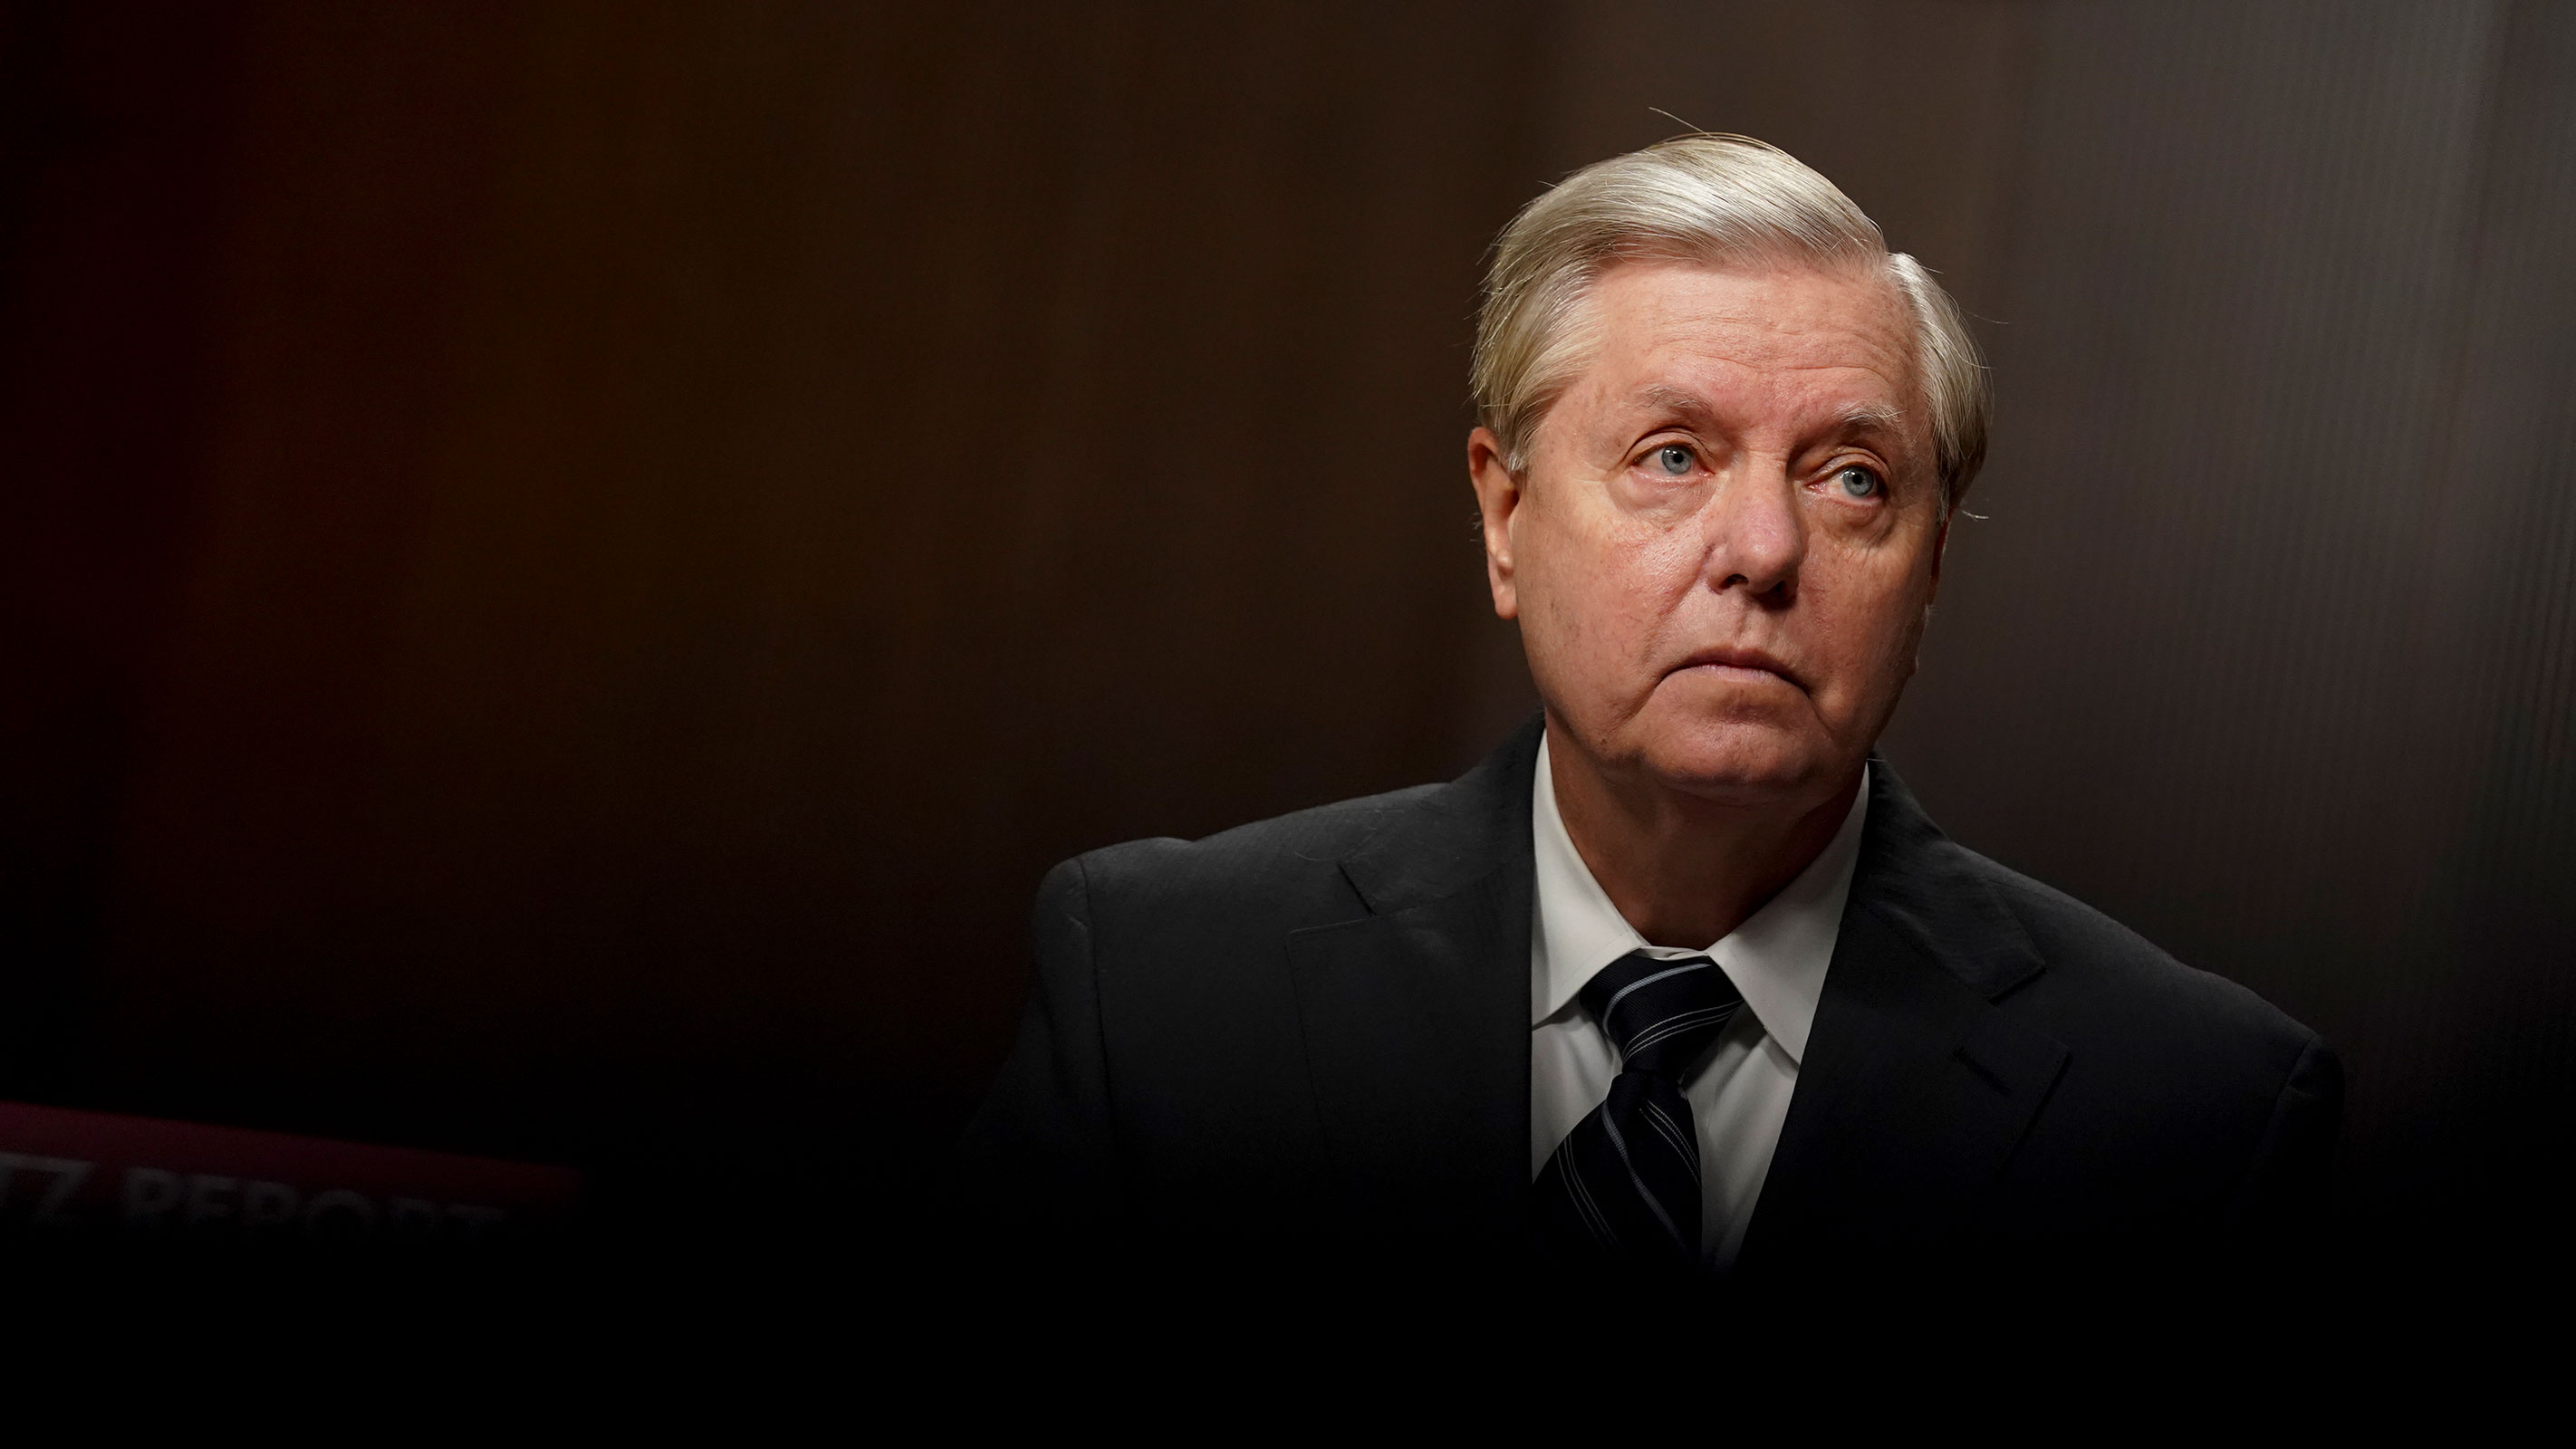 Sen. Lindsey Graham waits to begin a hearing on Wednesday, September 30, 2020 on Capitol Hill in Washington, DC.